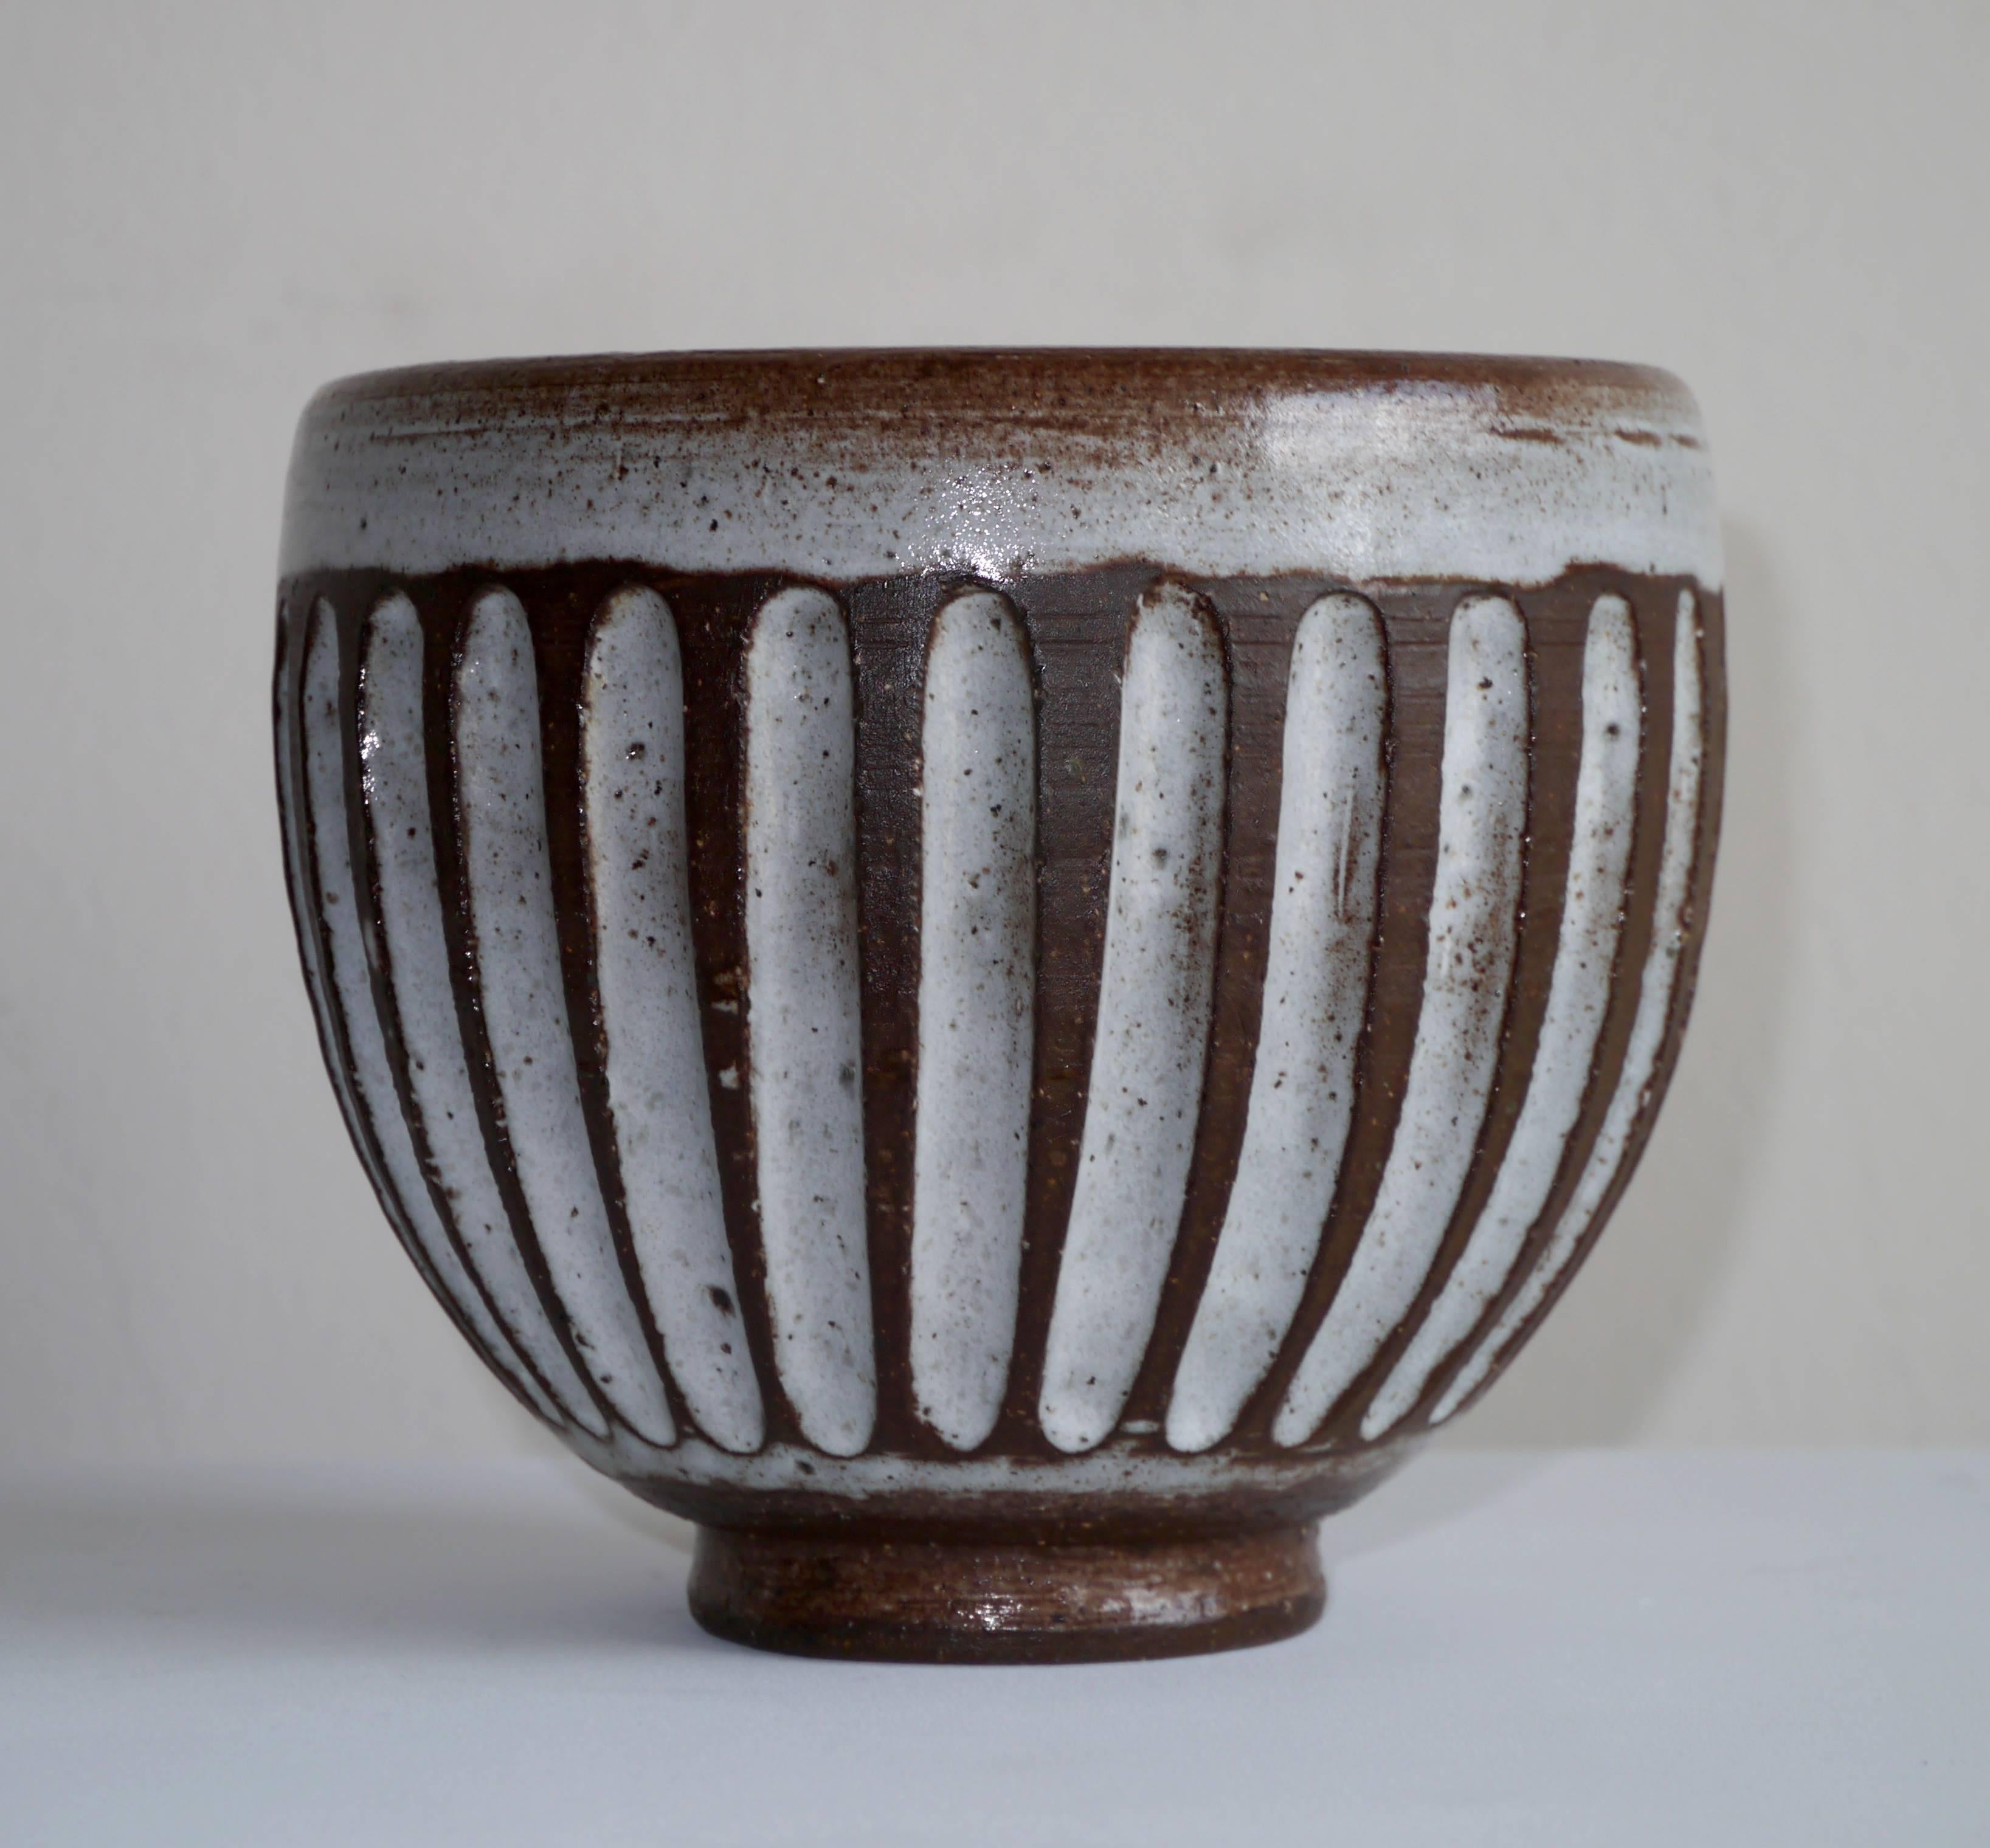 An elegant and textured stoneware piece.
Signed Pol Chambost on bottom.